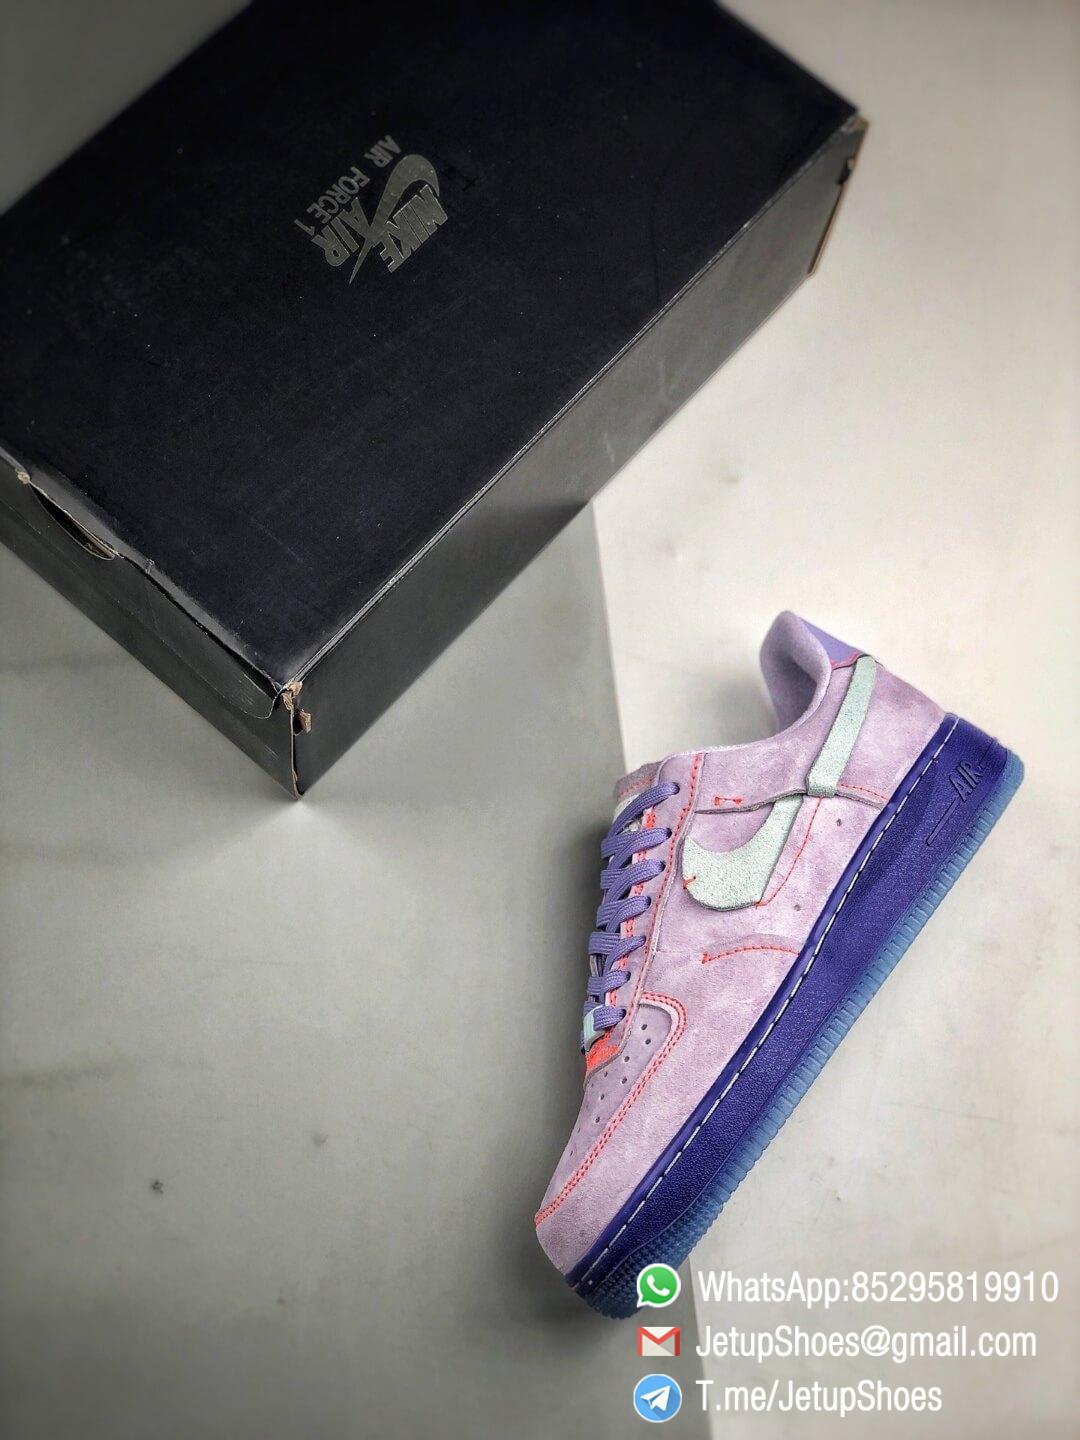 The Nike Wmns Air Force 1 Low LX Purple Agate Suede Upper Orange Stitches Ocean Blue Outsoles Repsneaker 12